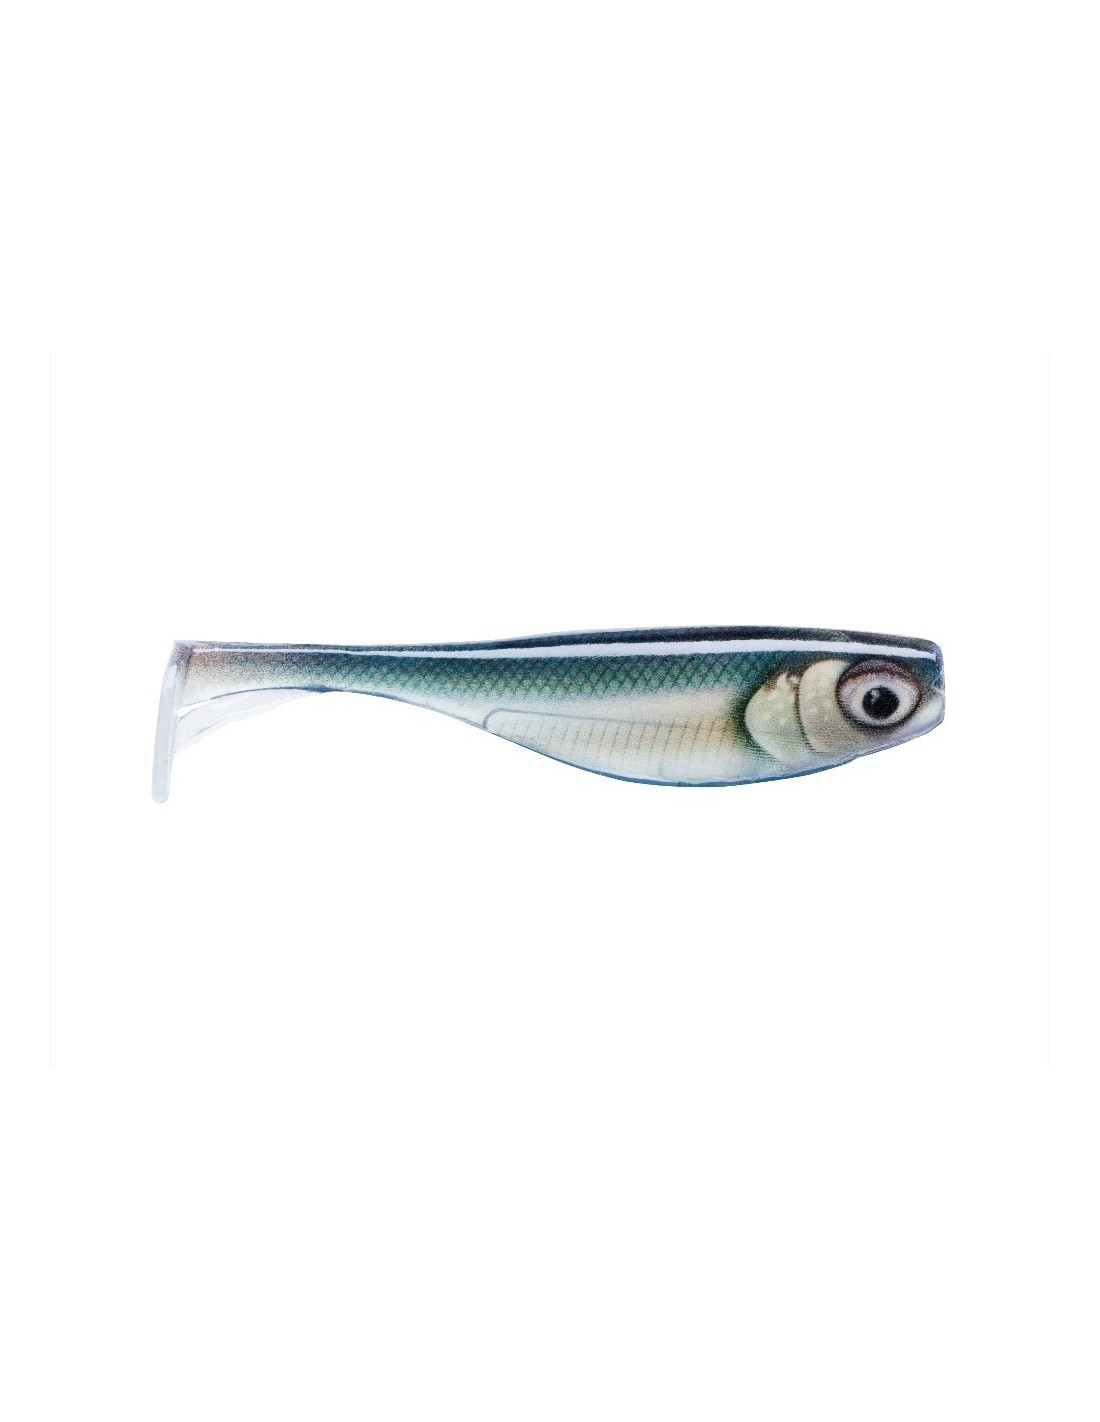 Shad Storm Hit Shad, Culoare Rugen Smelt, 8cm, 6g, 5buc/blister